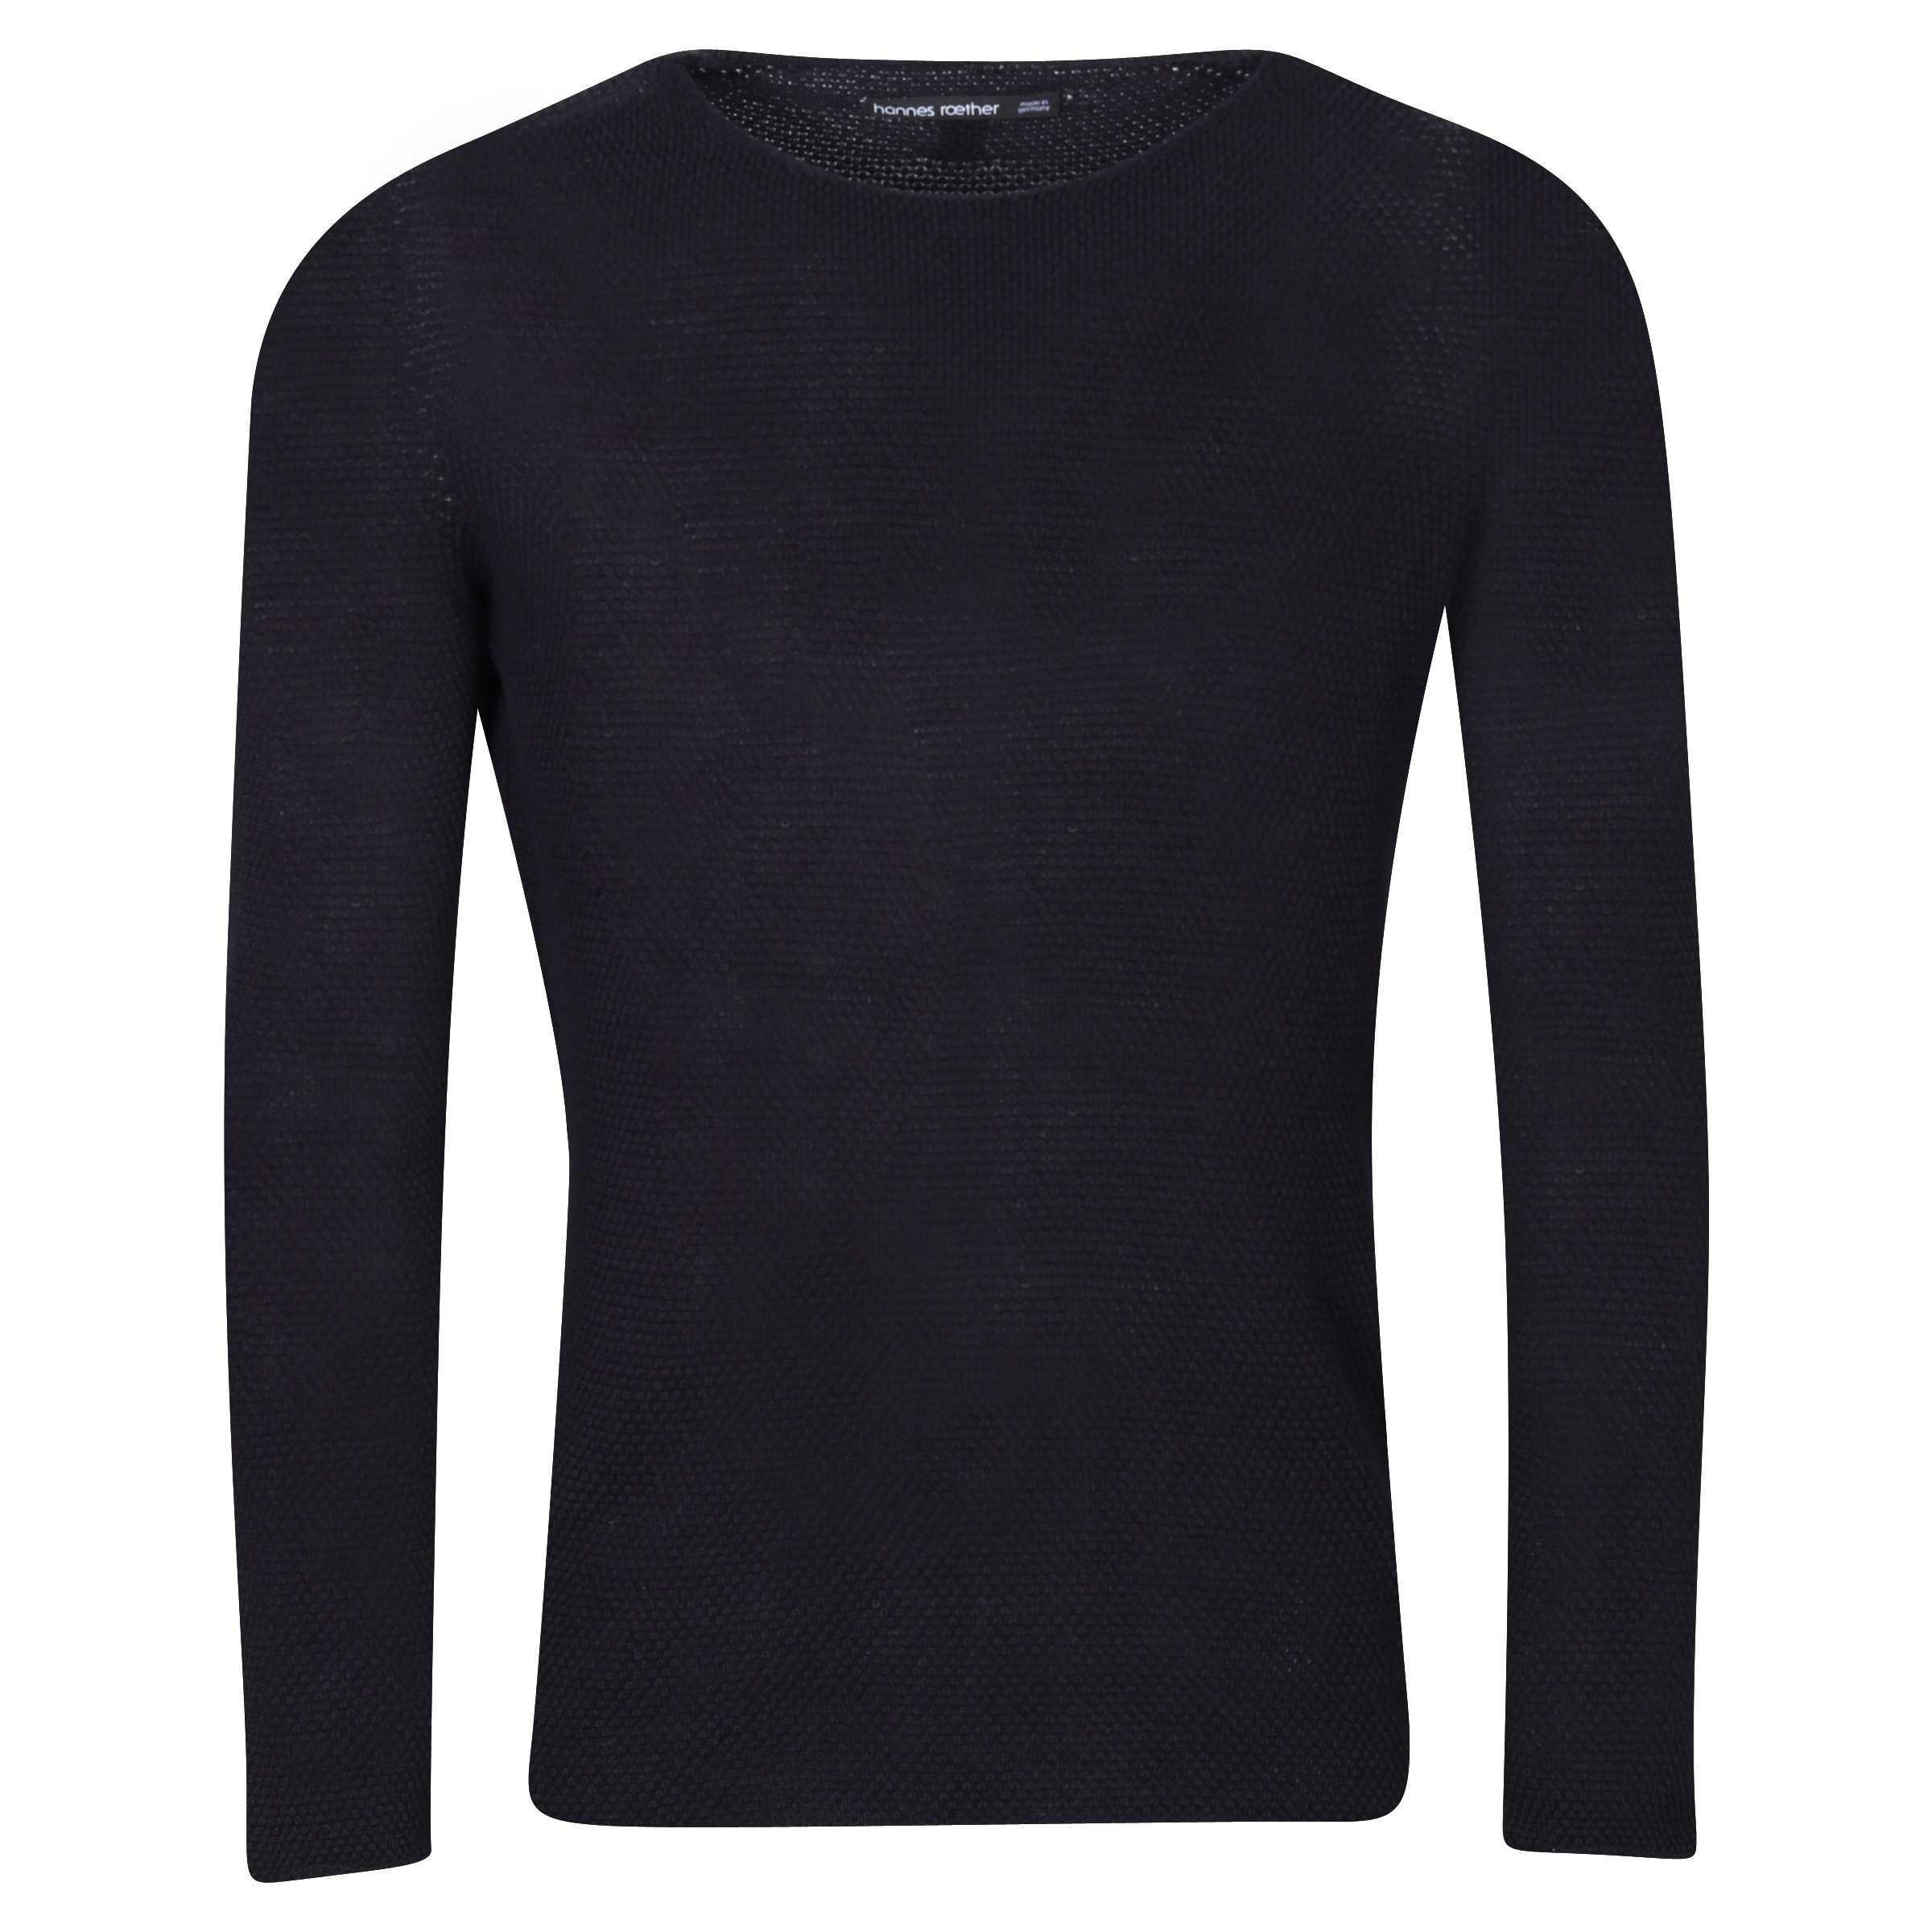 Hannes Roether Pique Knit Sweater Nightblue